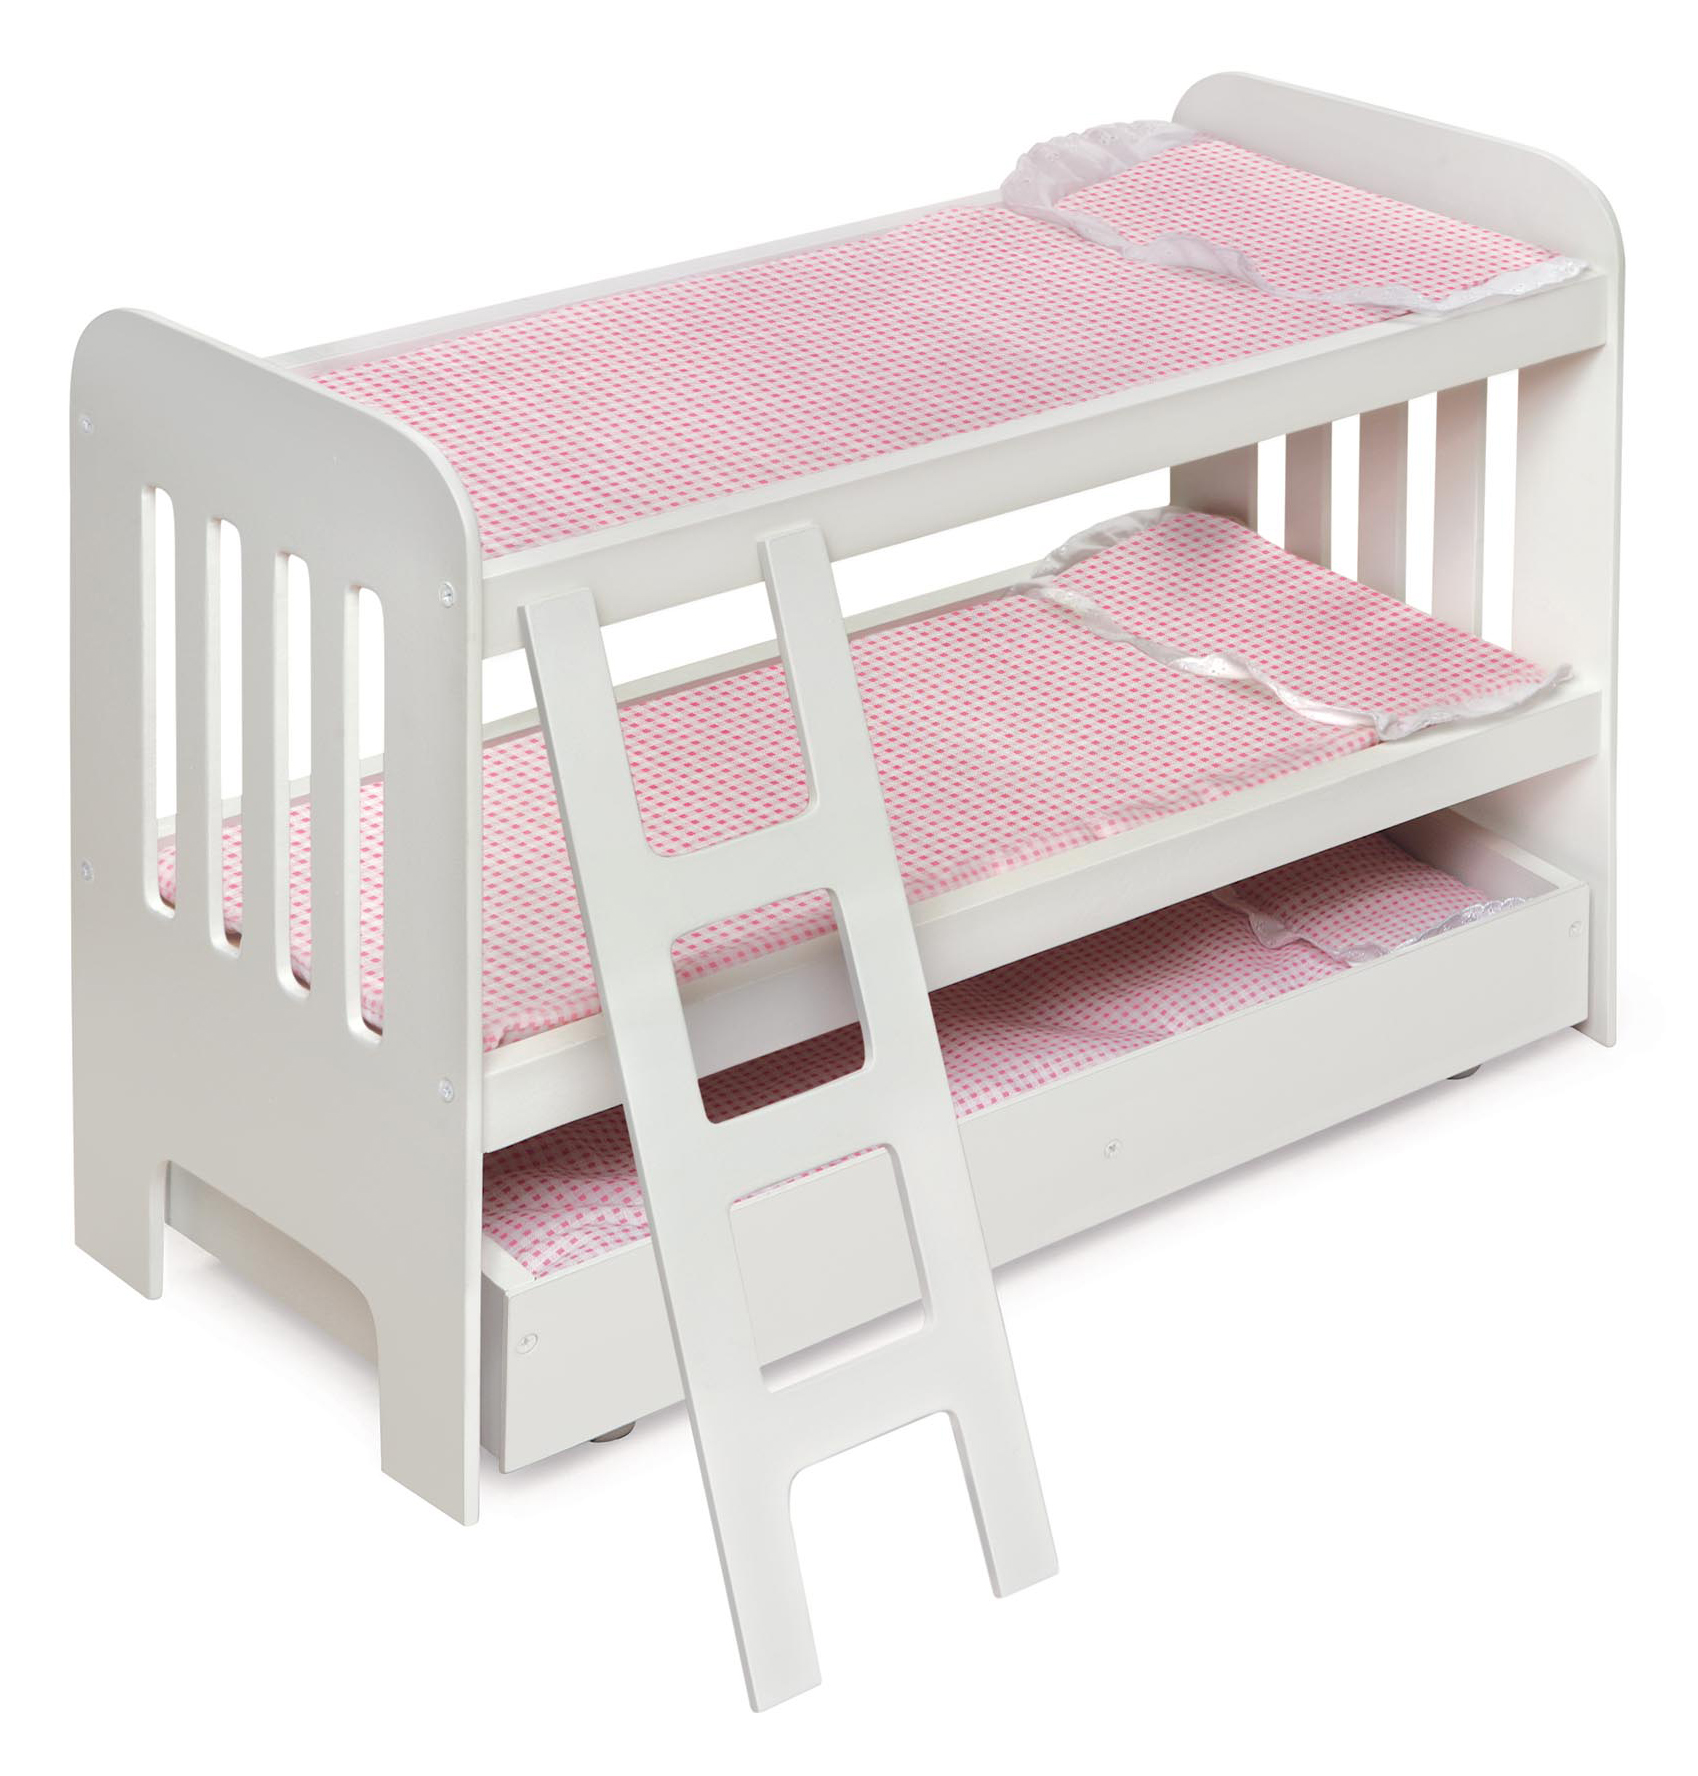 Trundle Doll Bunk Bed with Ladder and Free Personalization Kit - White/Pink